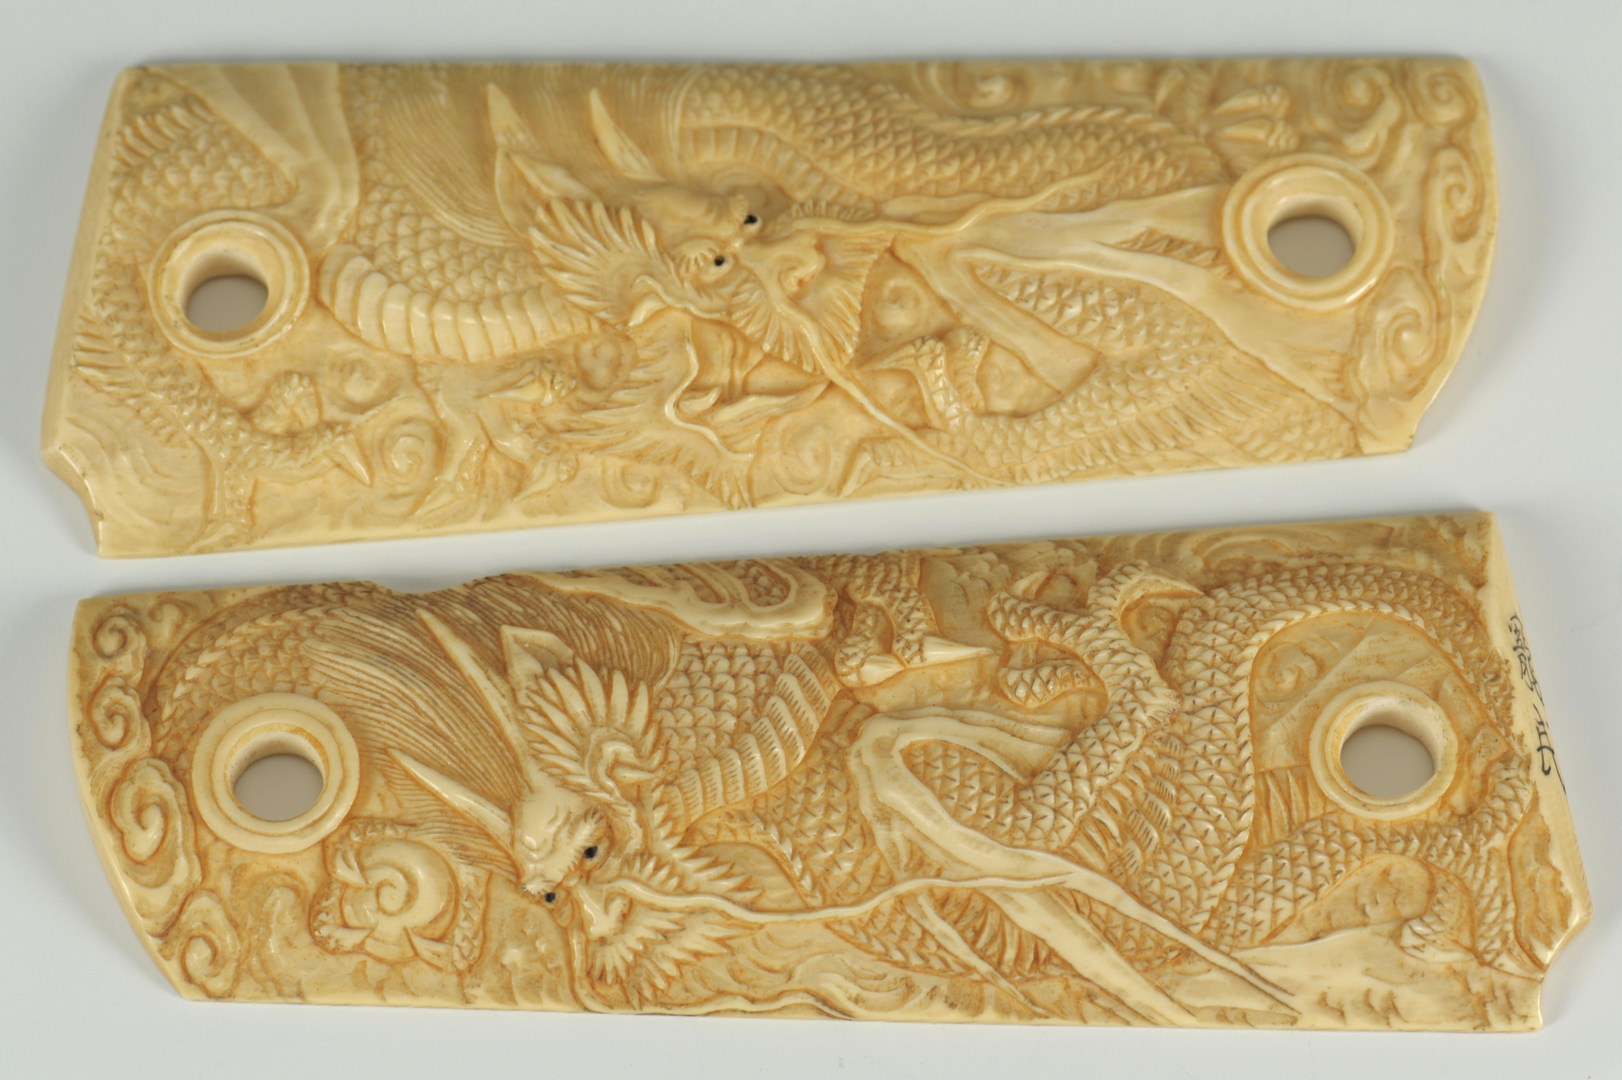 Lot 190: Japanese Ivory: Dragon Pistol Grips and Eggplant